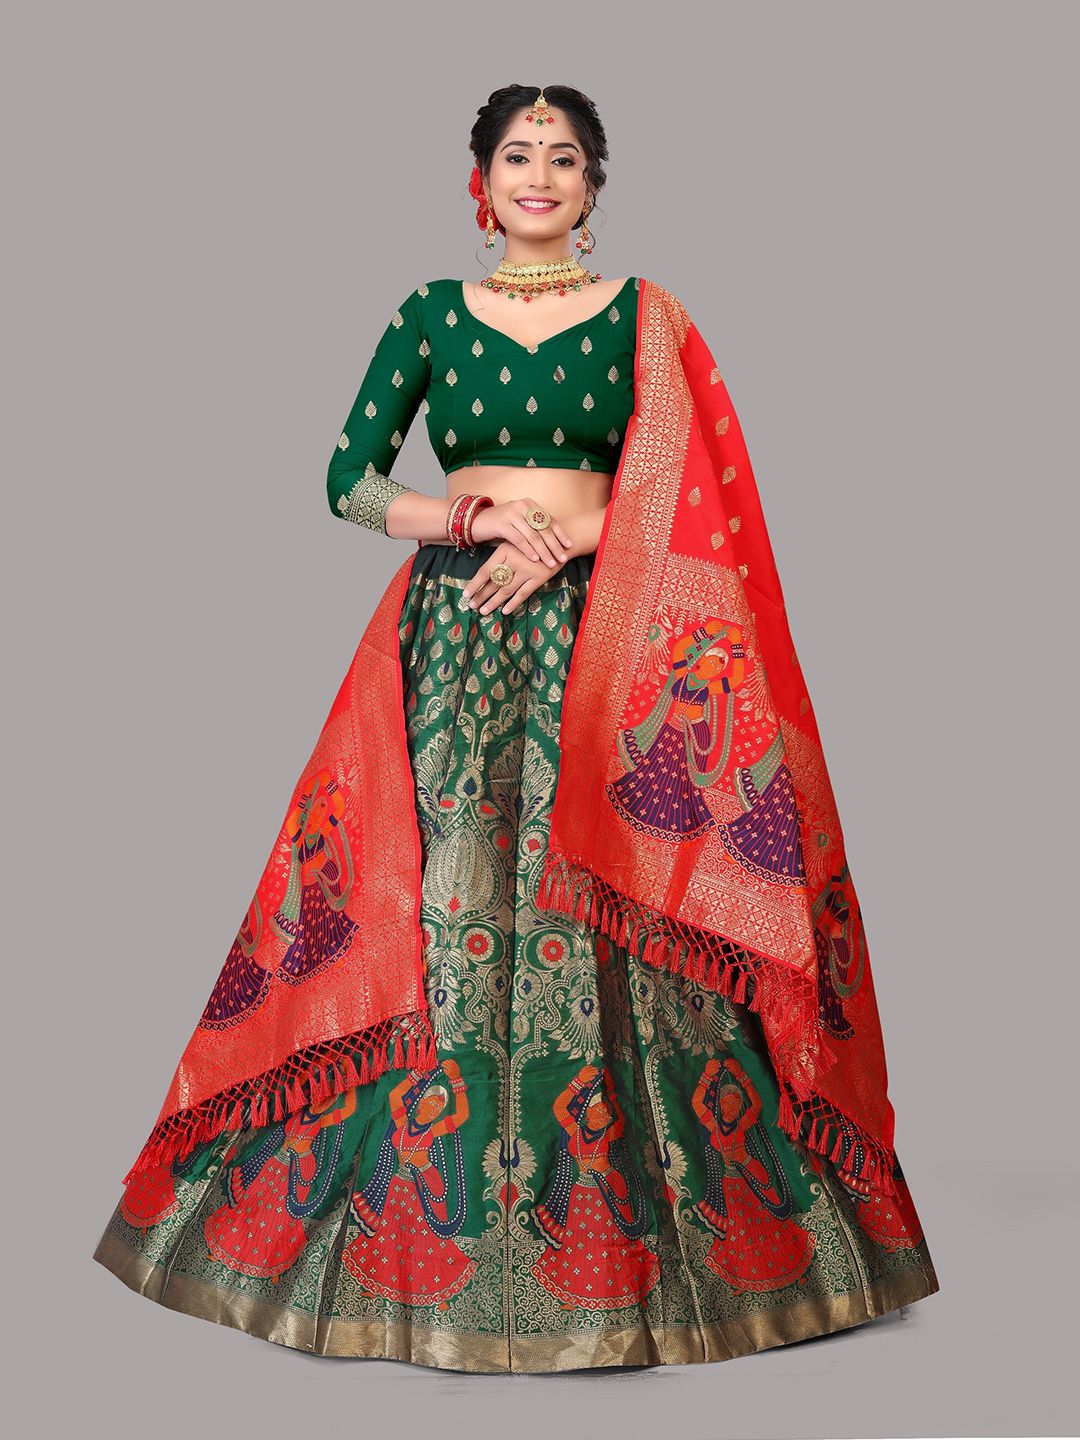 Atsevam Green & Red Semi-Stitched Lehenga & Unstitched Blouse With Dupatta Price in India